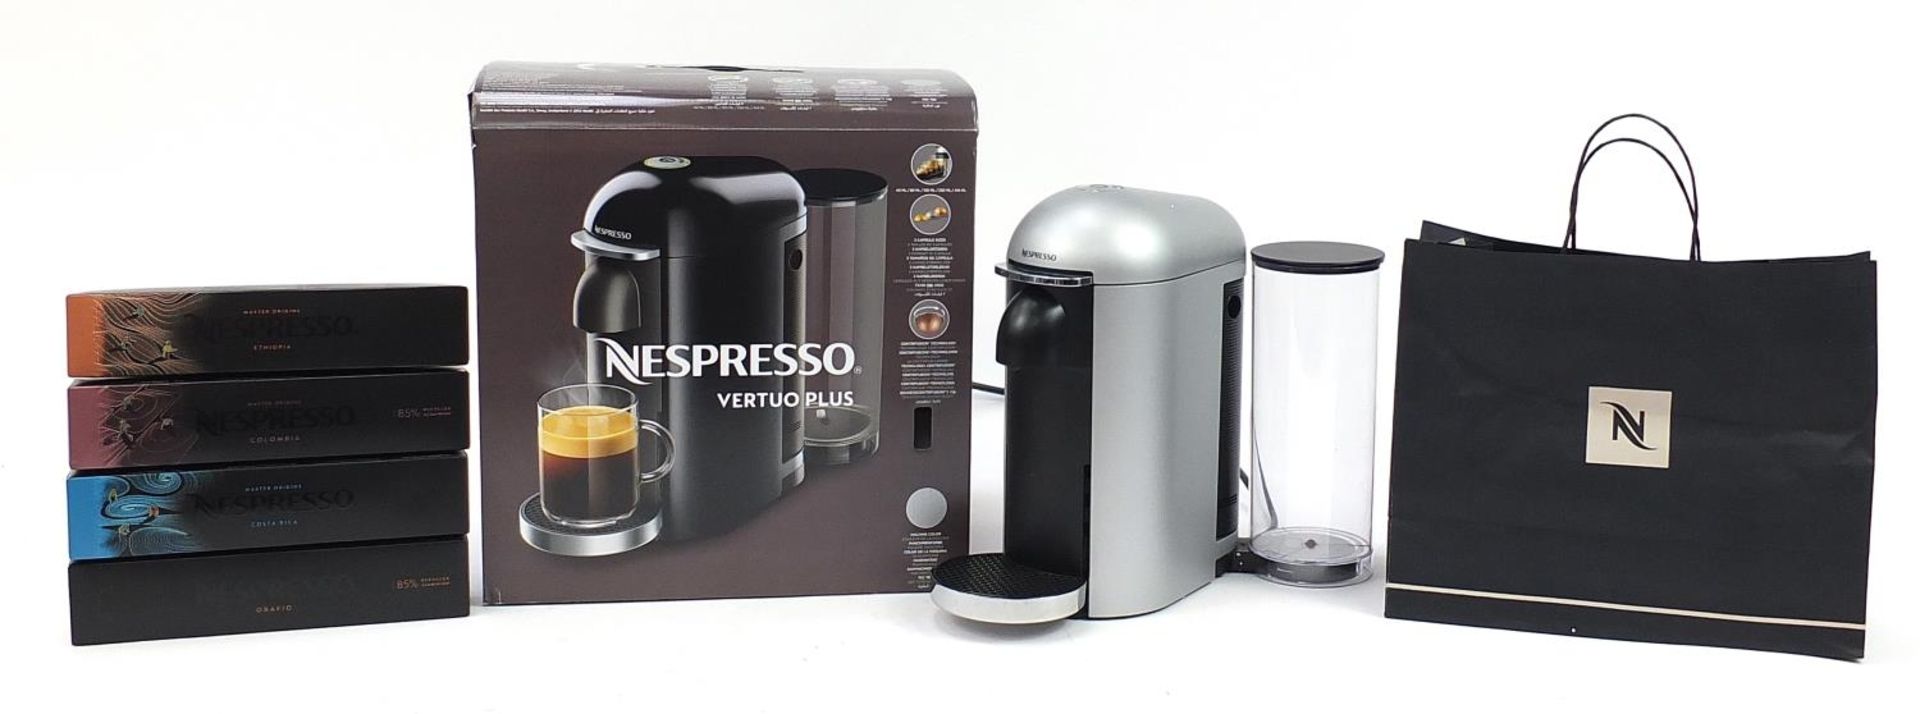 Nespresso Vertuo Plus coffee machine with box and four packets of pods